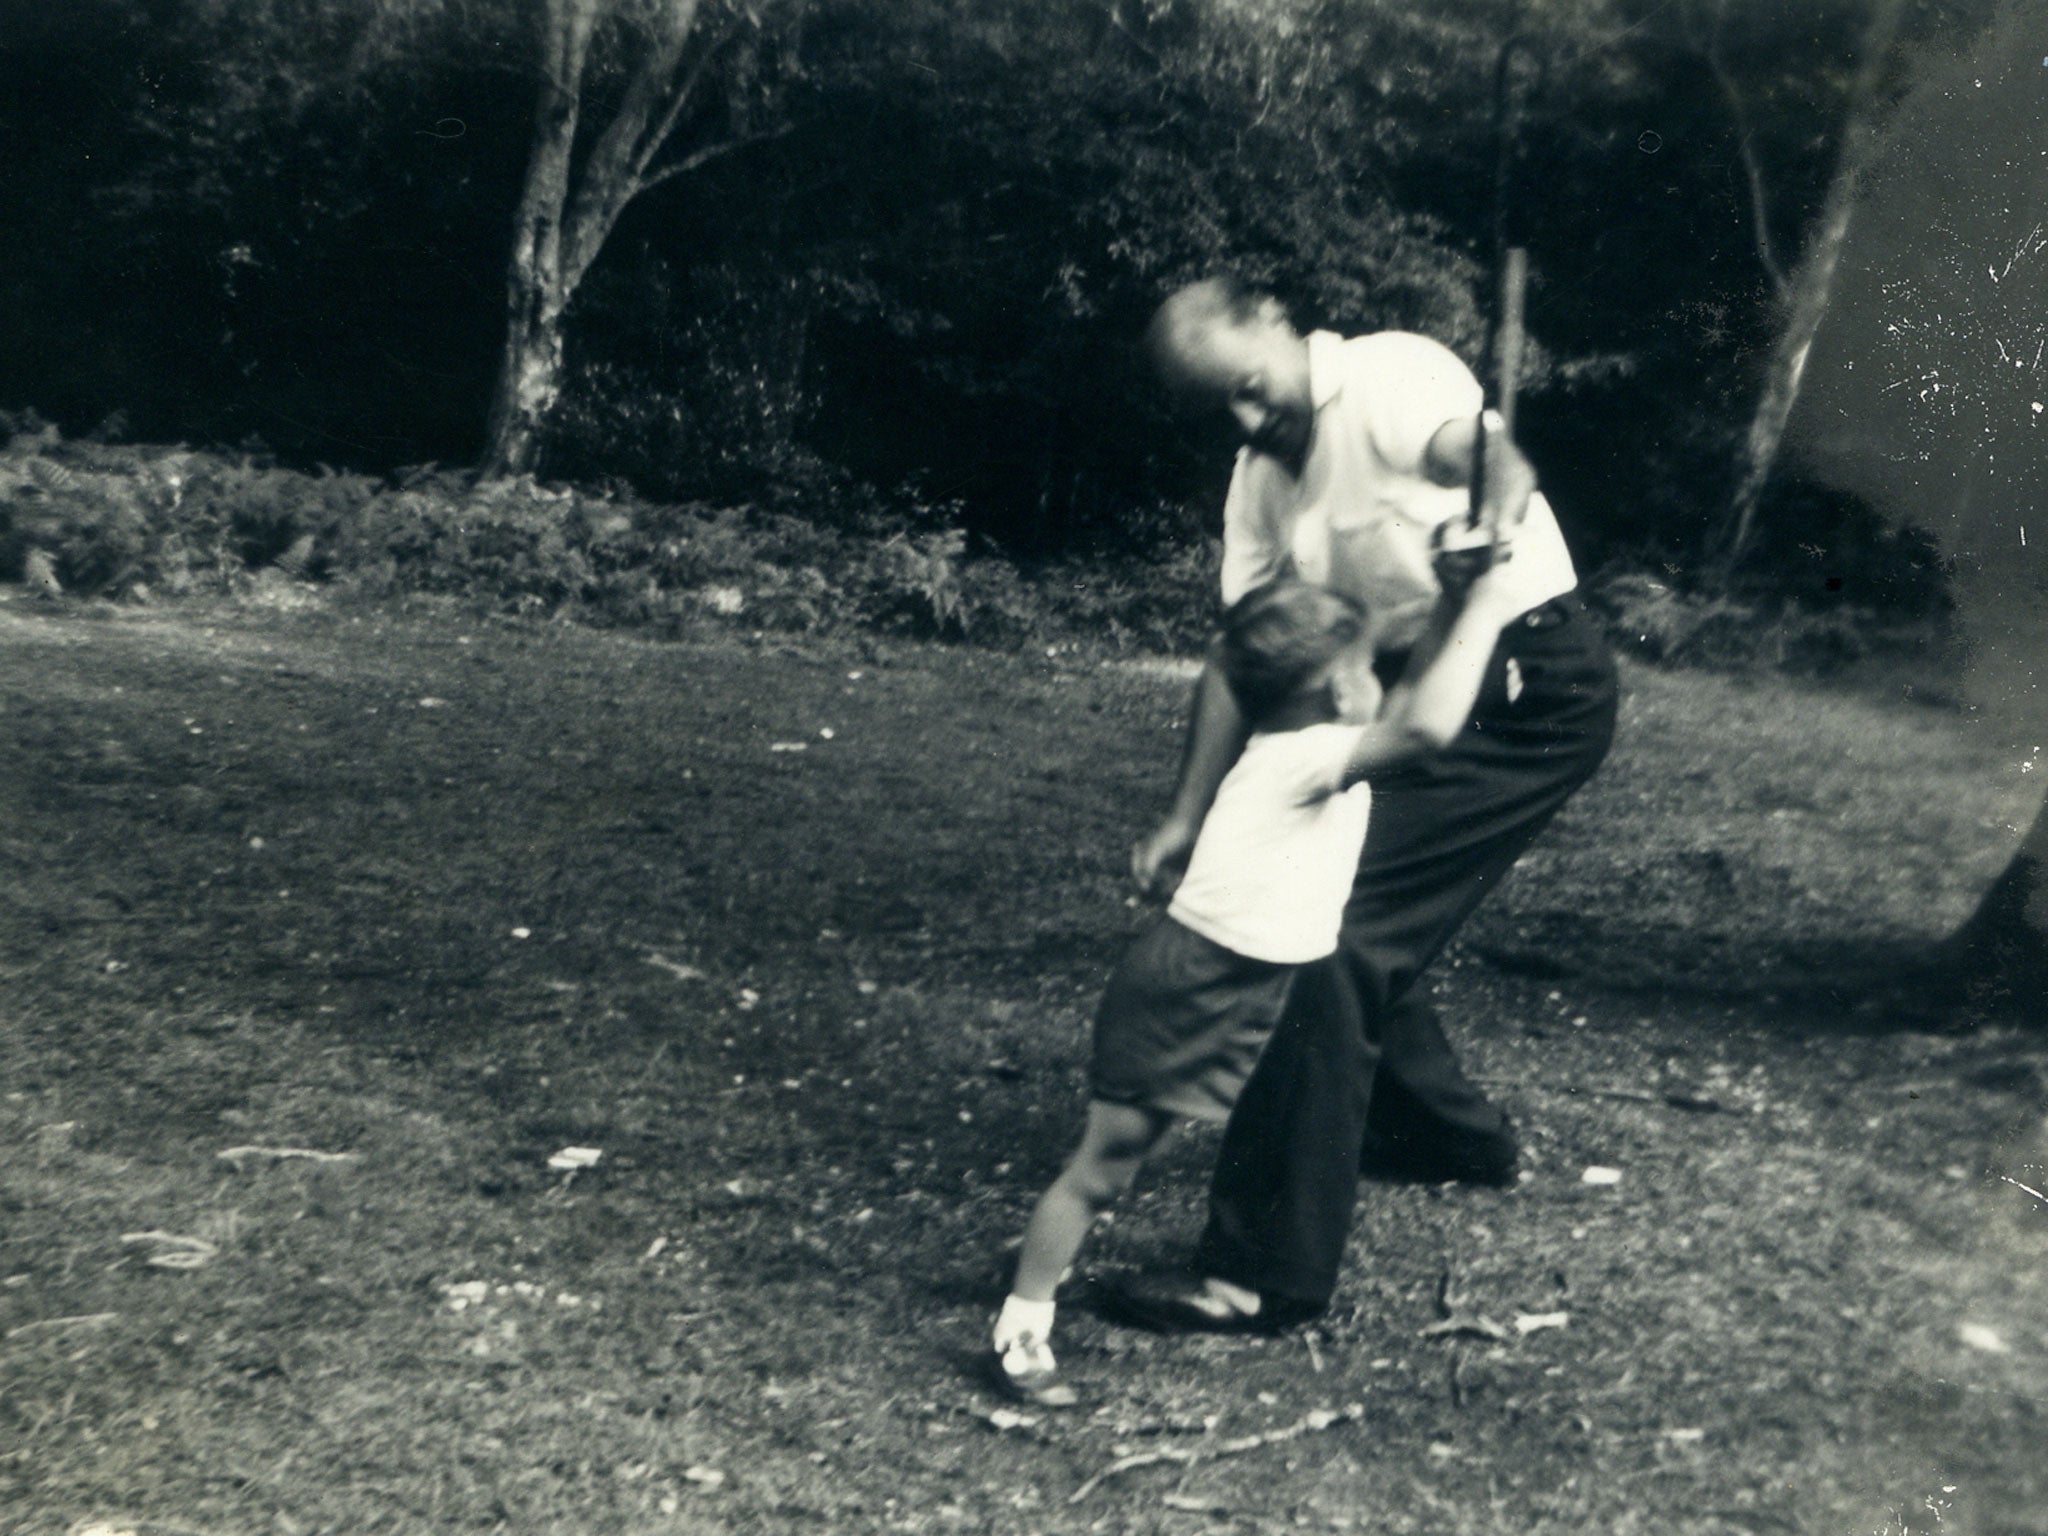 ‘Dad and I playing at war in the New Forest, Hampshire, around 1961’